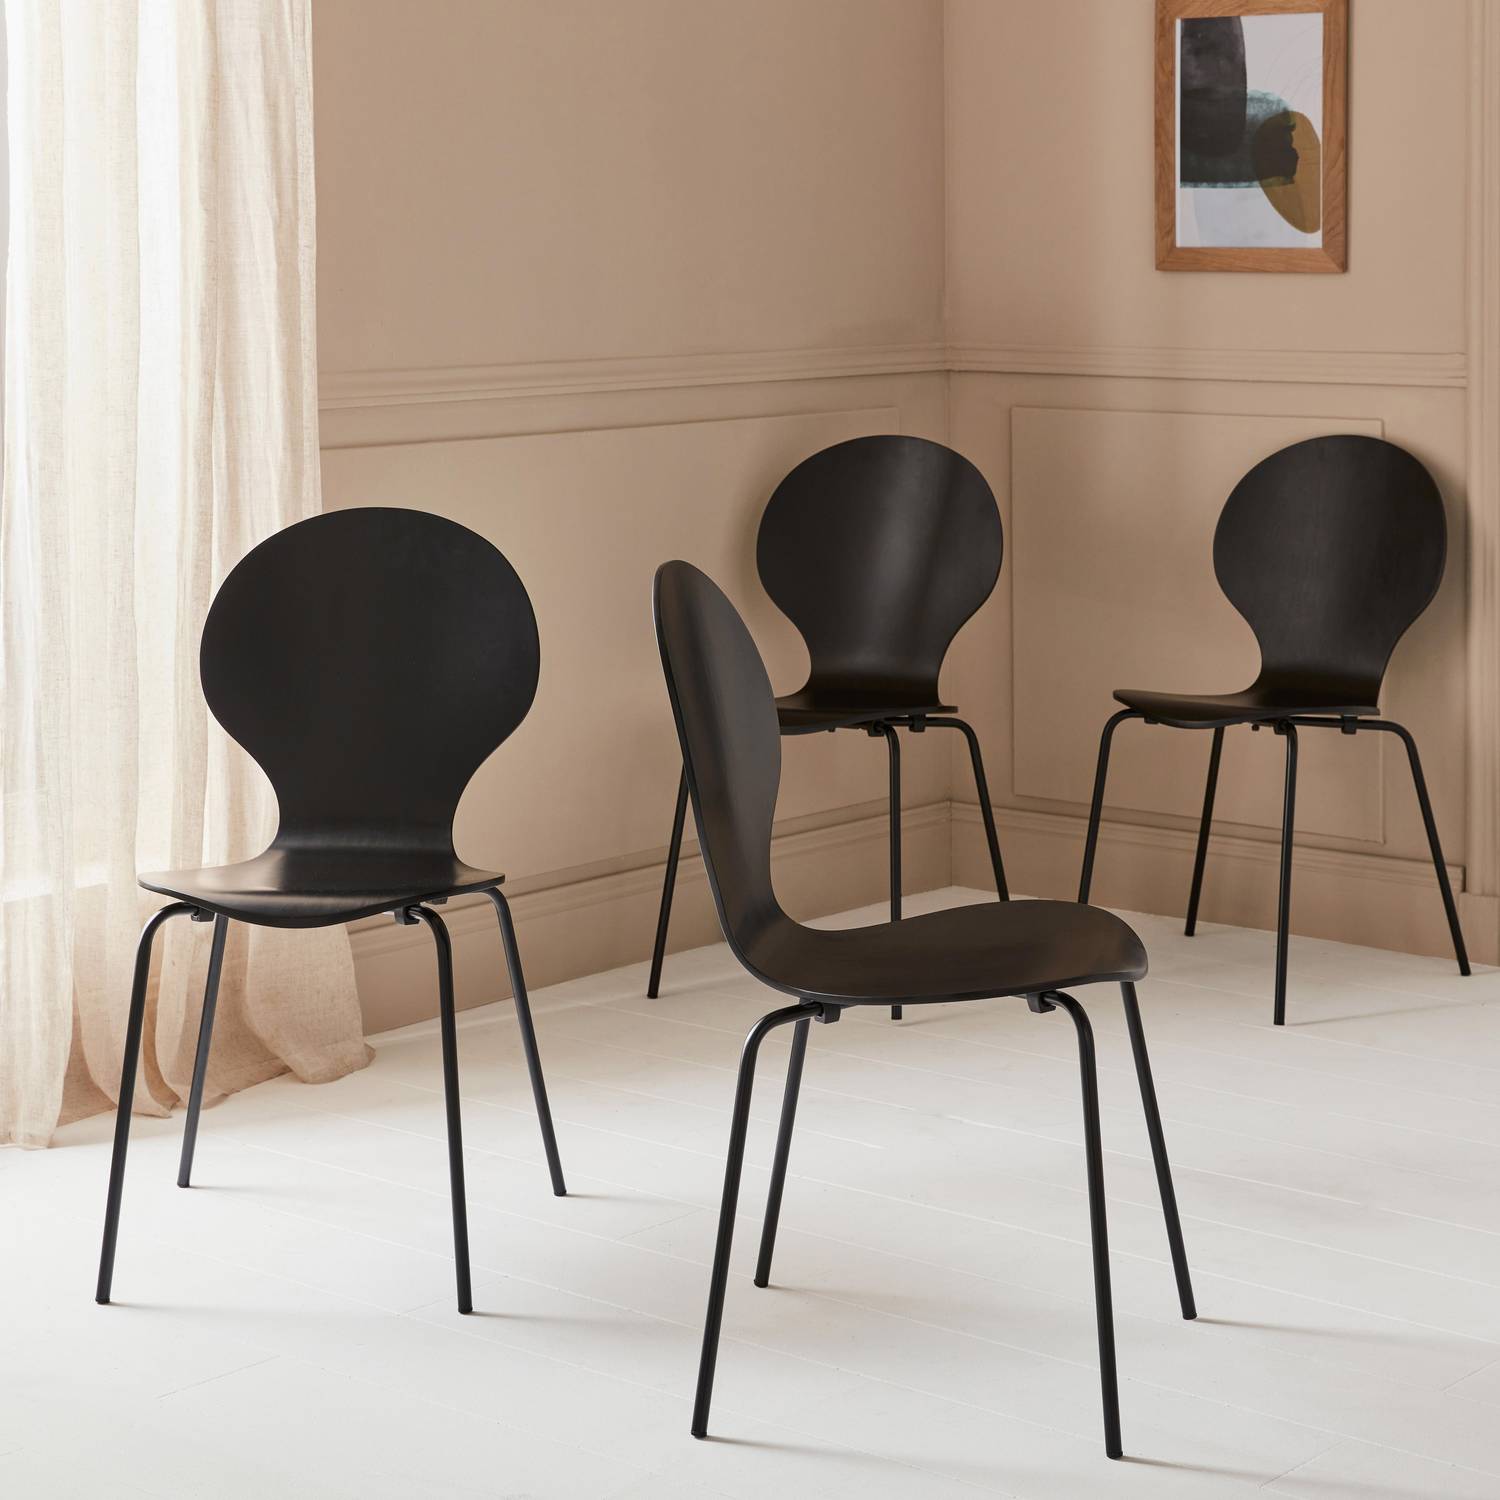 Set of 4 stackable Retro Chairs, Wood and Plywood, black,  L43 x W48 x H87cm Photo1